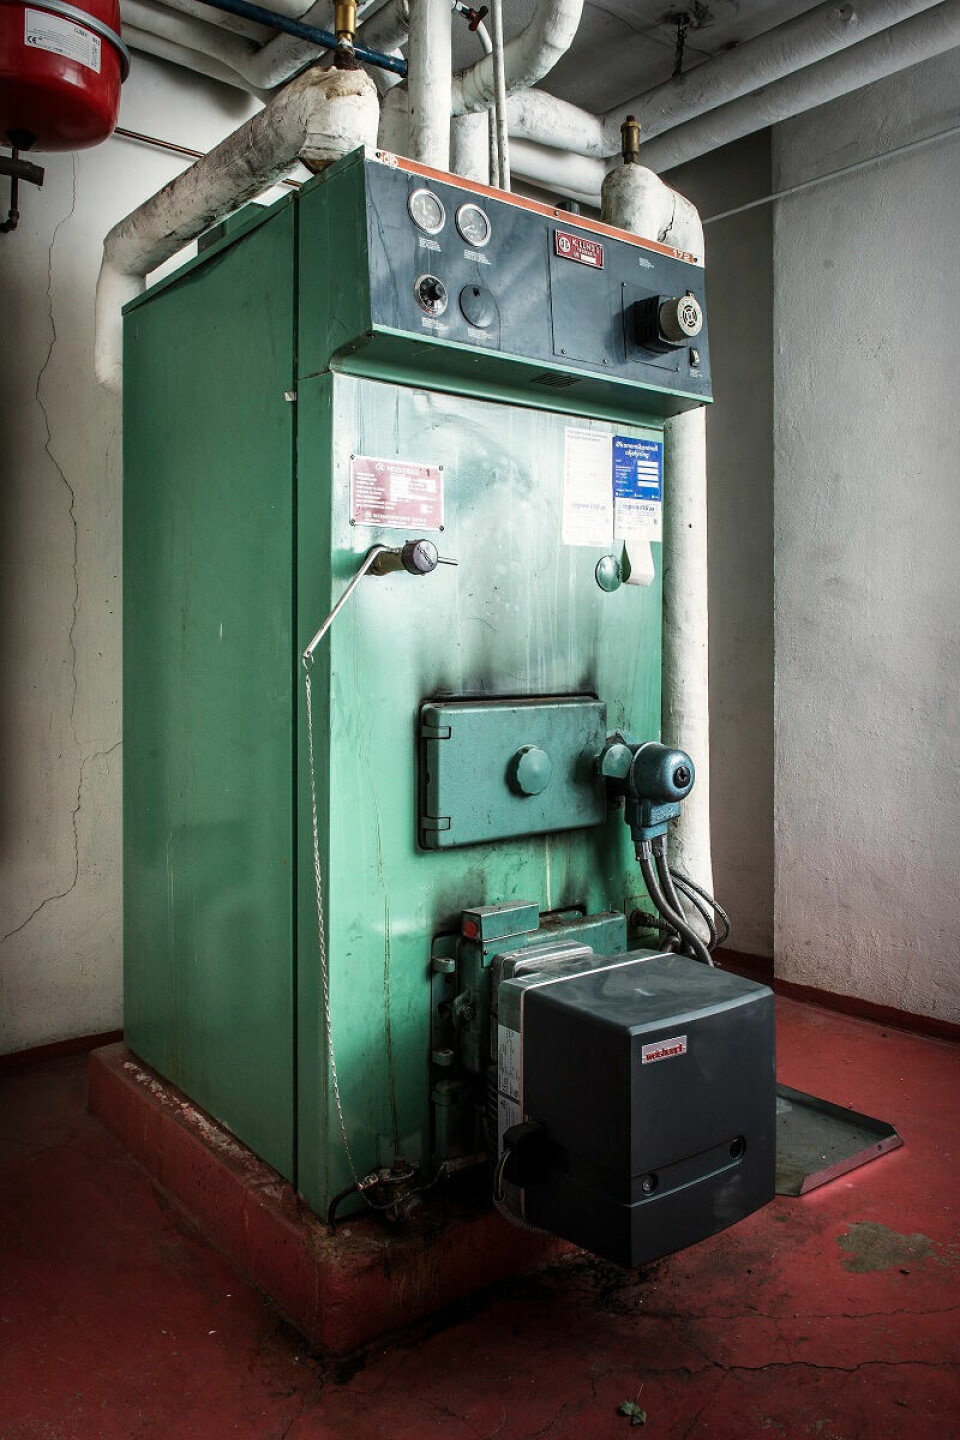 Oil heating was more common in the past, but it is no longer allowed in Norway. The photo shows an old oil heater.